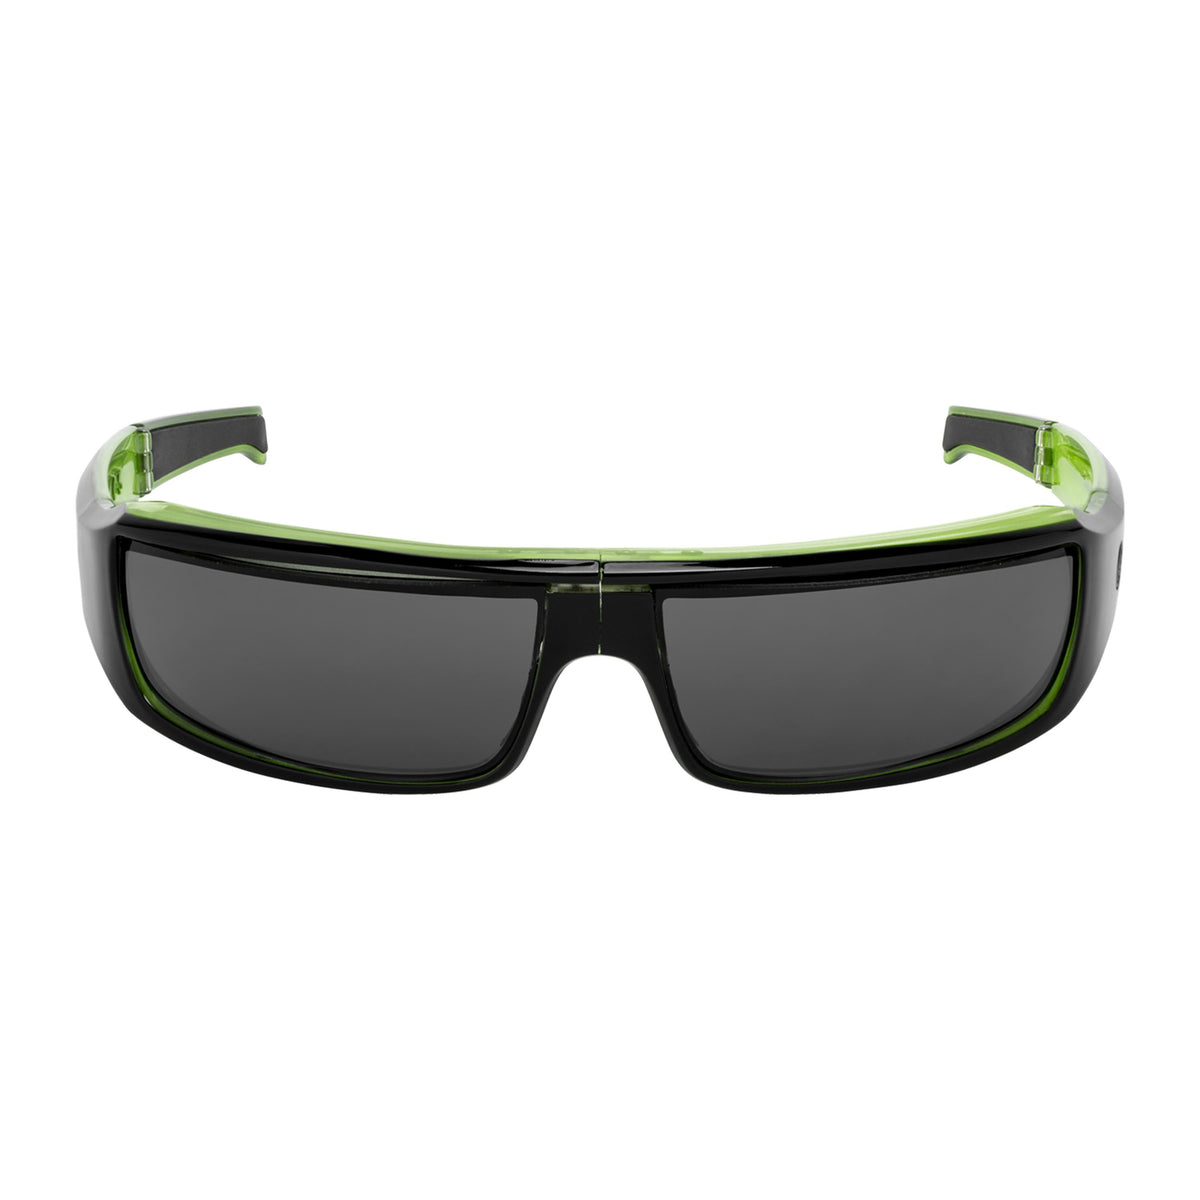 Popticals, Premium Compact Sunglasses, PopSign, 040020-GLGP, Polarized Sunglasses, Gloss Black over Green Crystal Frame, Gray Lenses, Front View